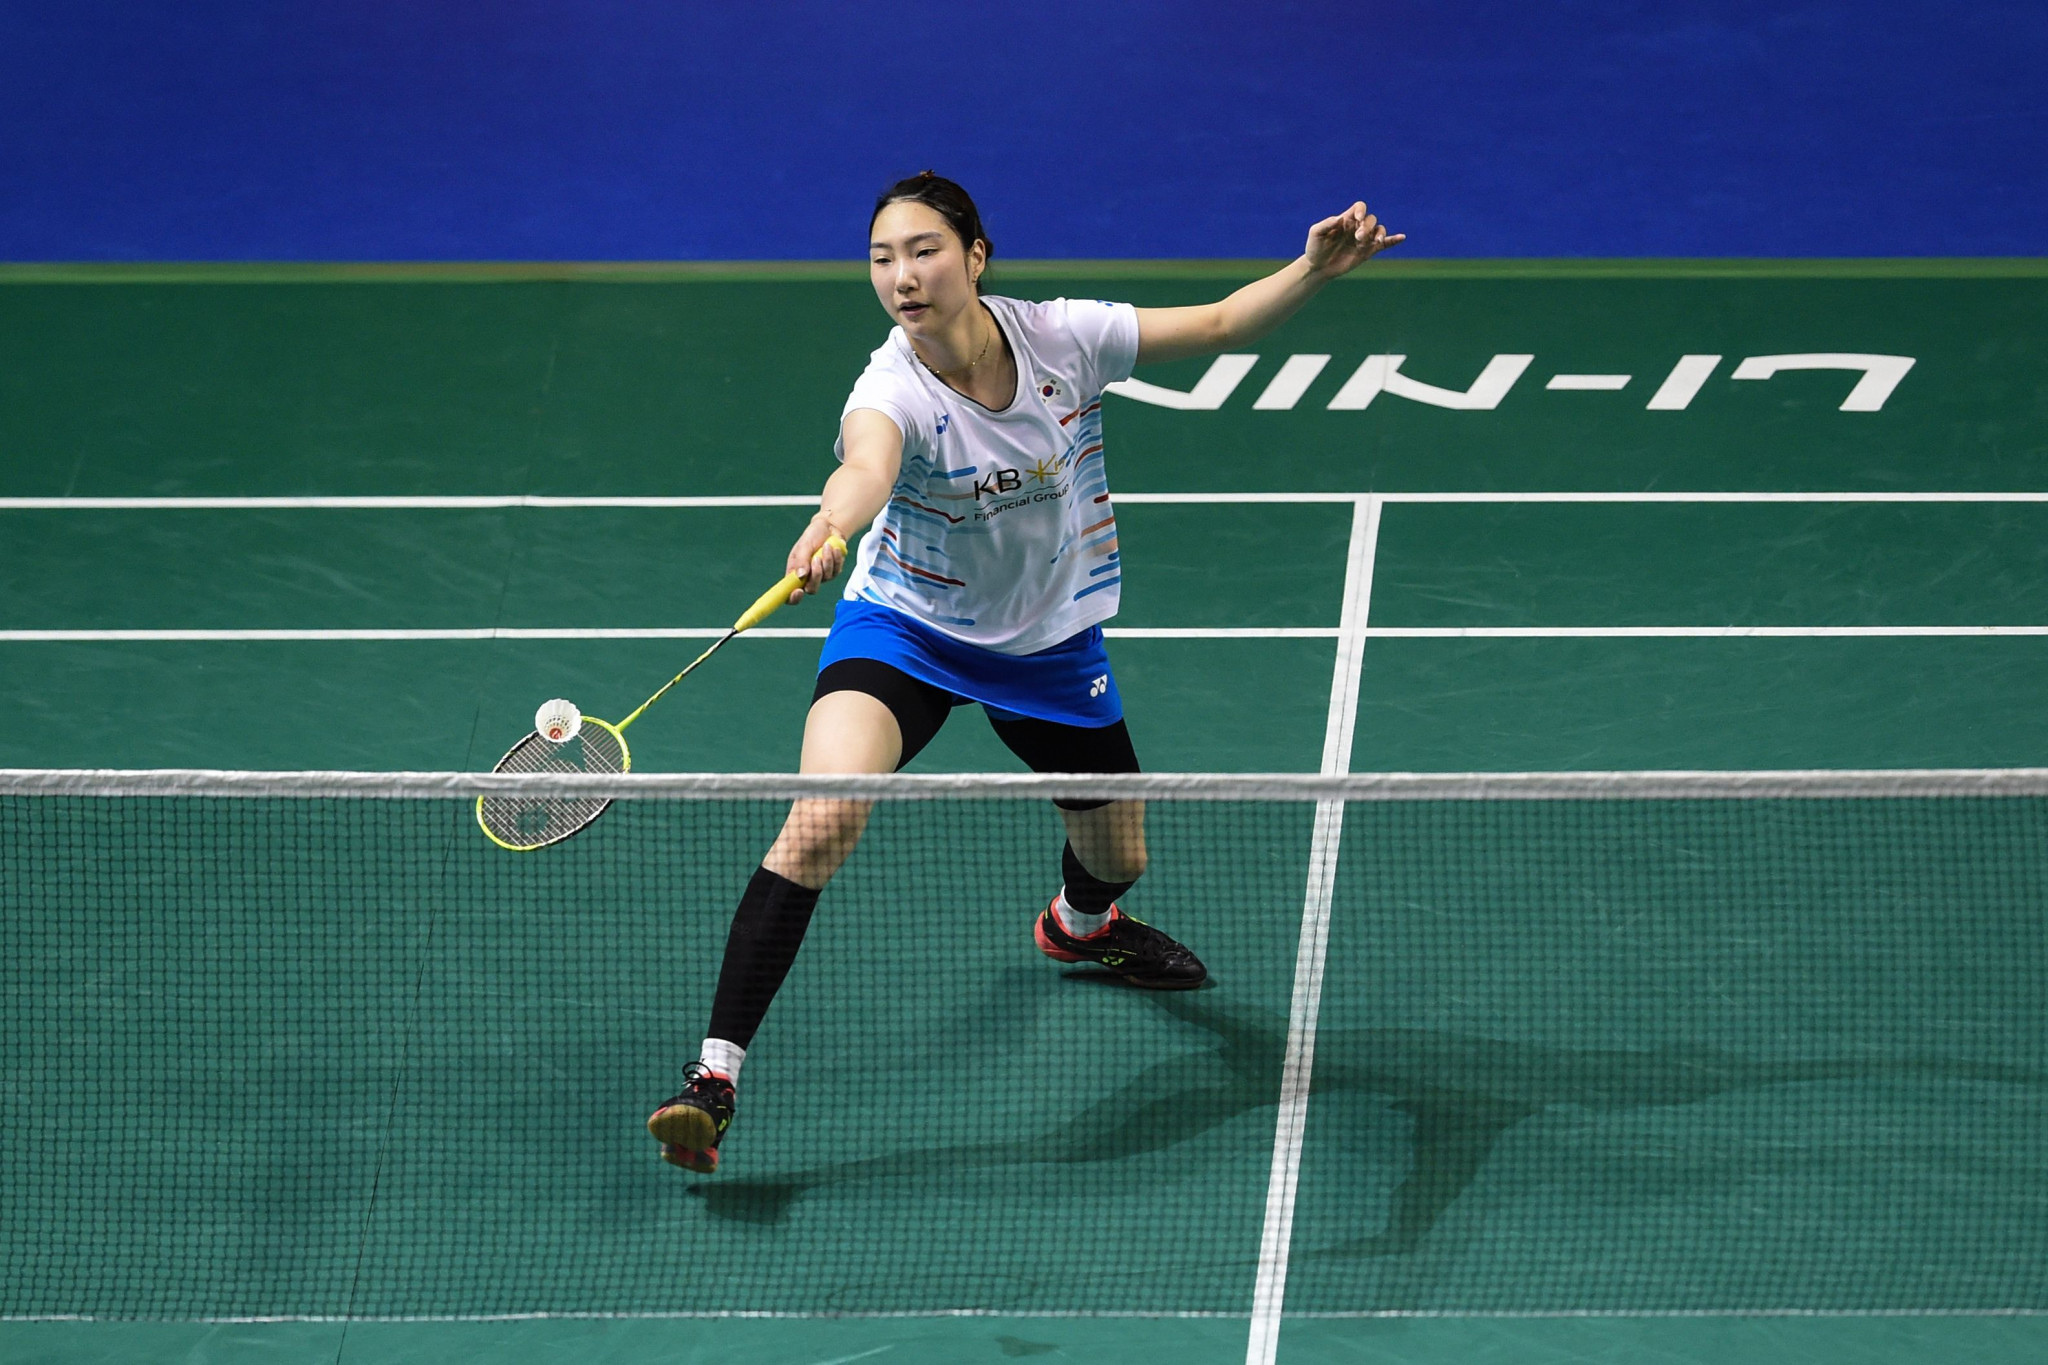 South Korea's Sung Ji-hyun was the only seeded player in the women's singles draw to suffer elimination today ©Getty Images